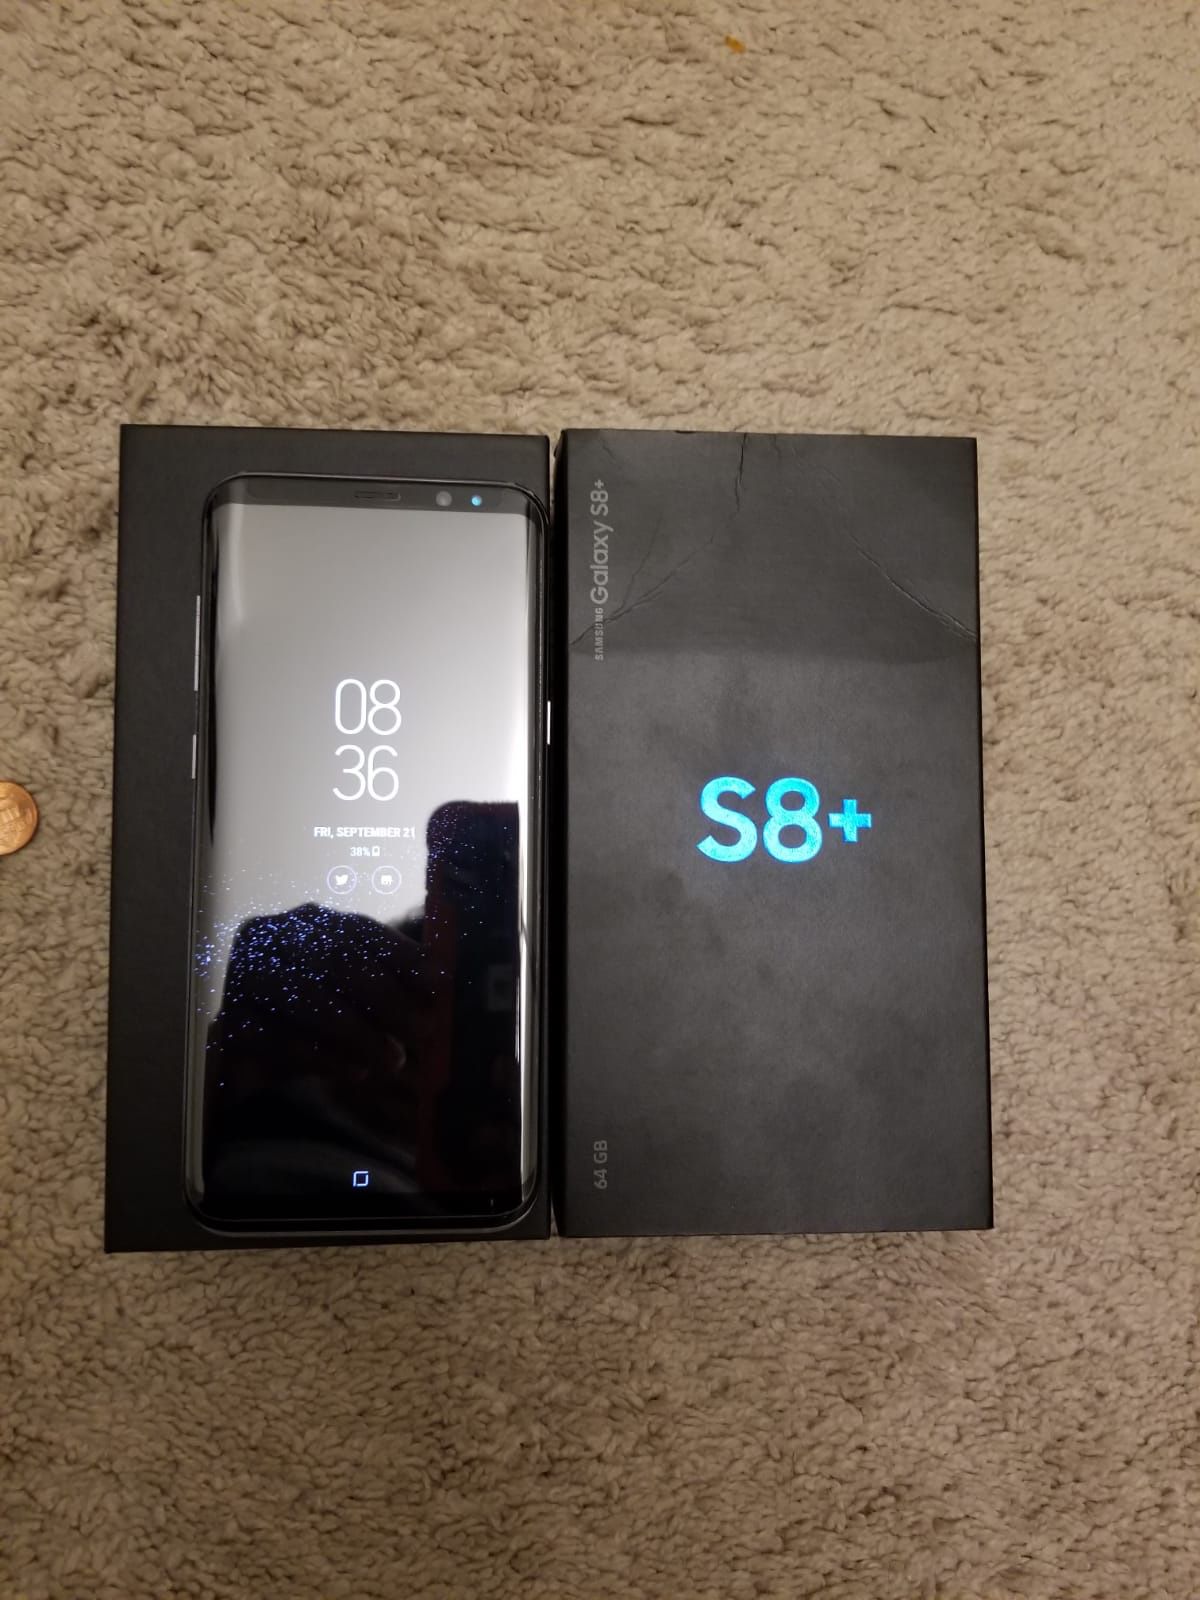 SAMSUNG GALAXY S8 PLUS UNLOCK TO ANY CARRIER COME WITH BOX 64GB OBO 430 OBO